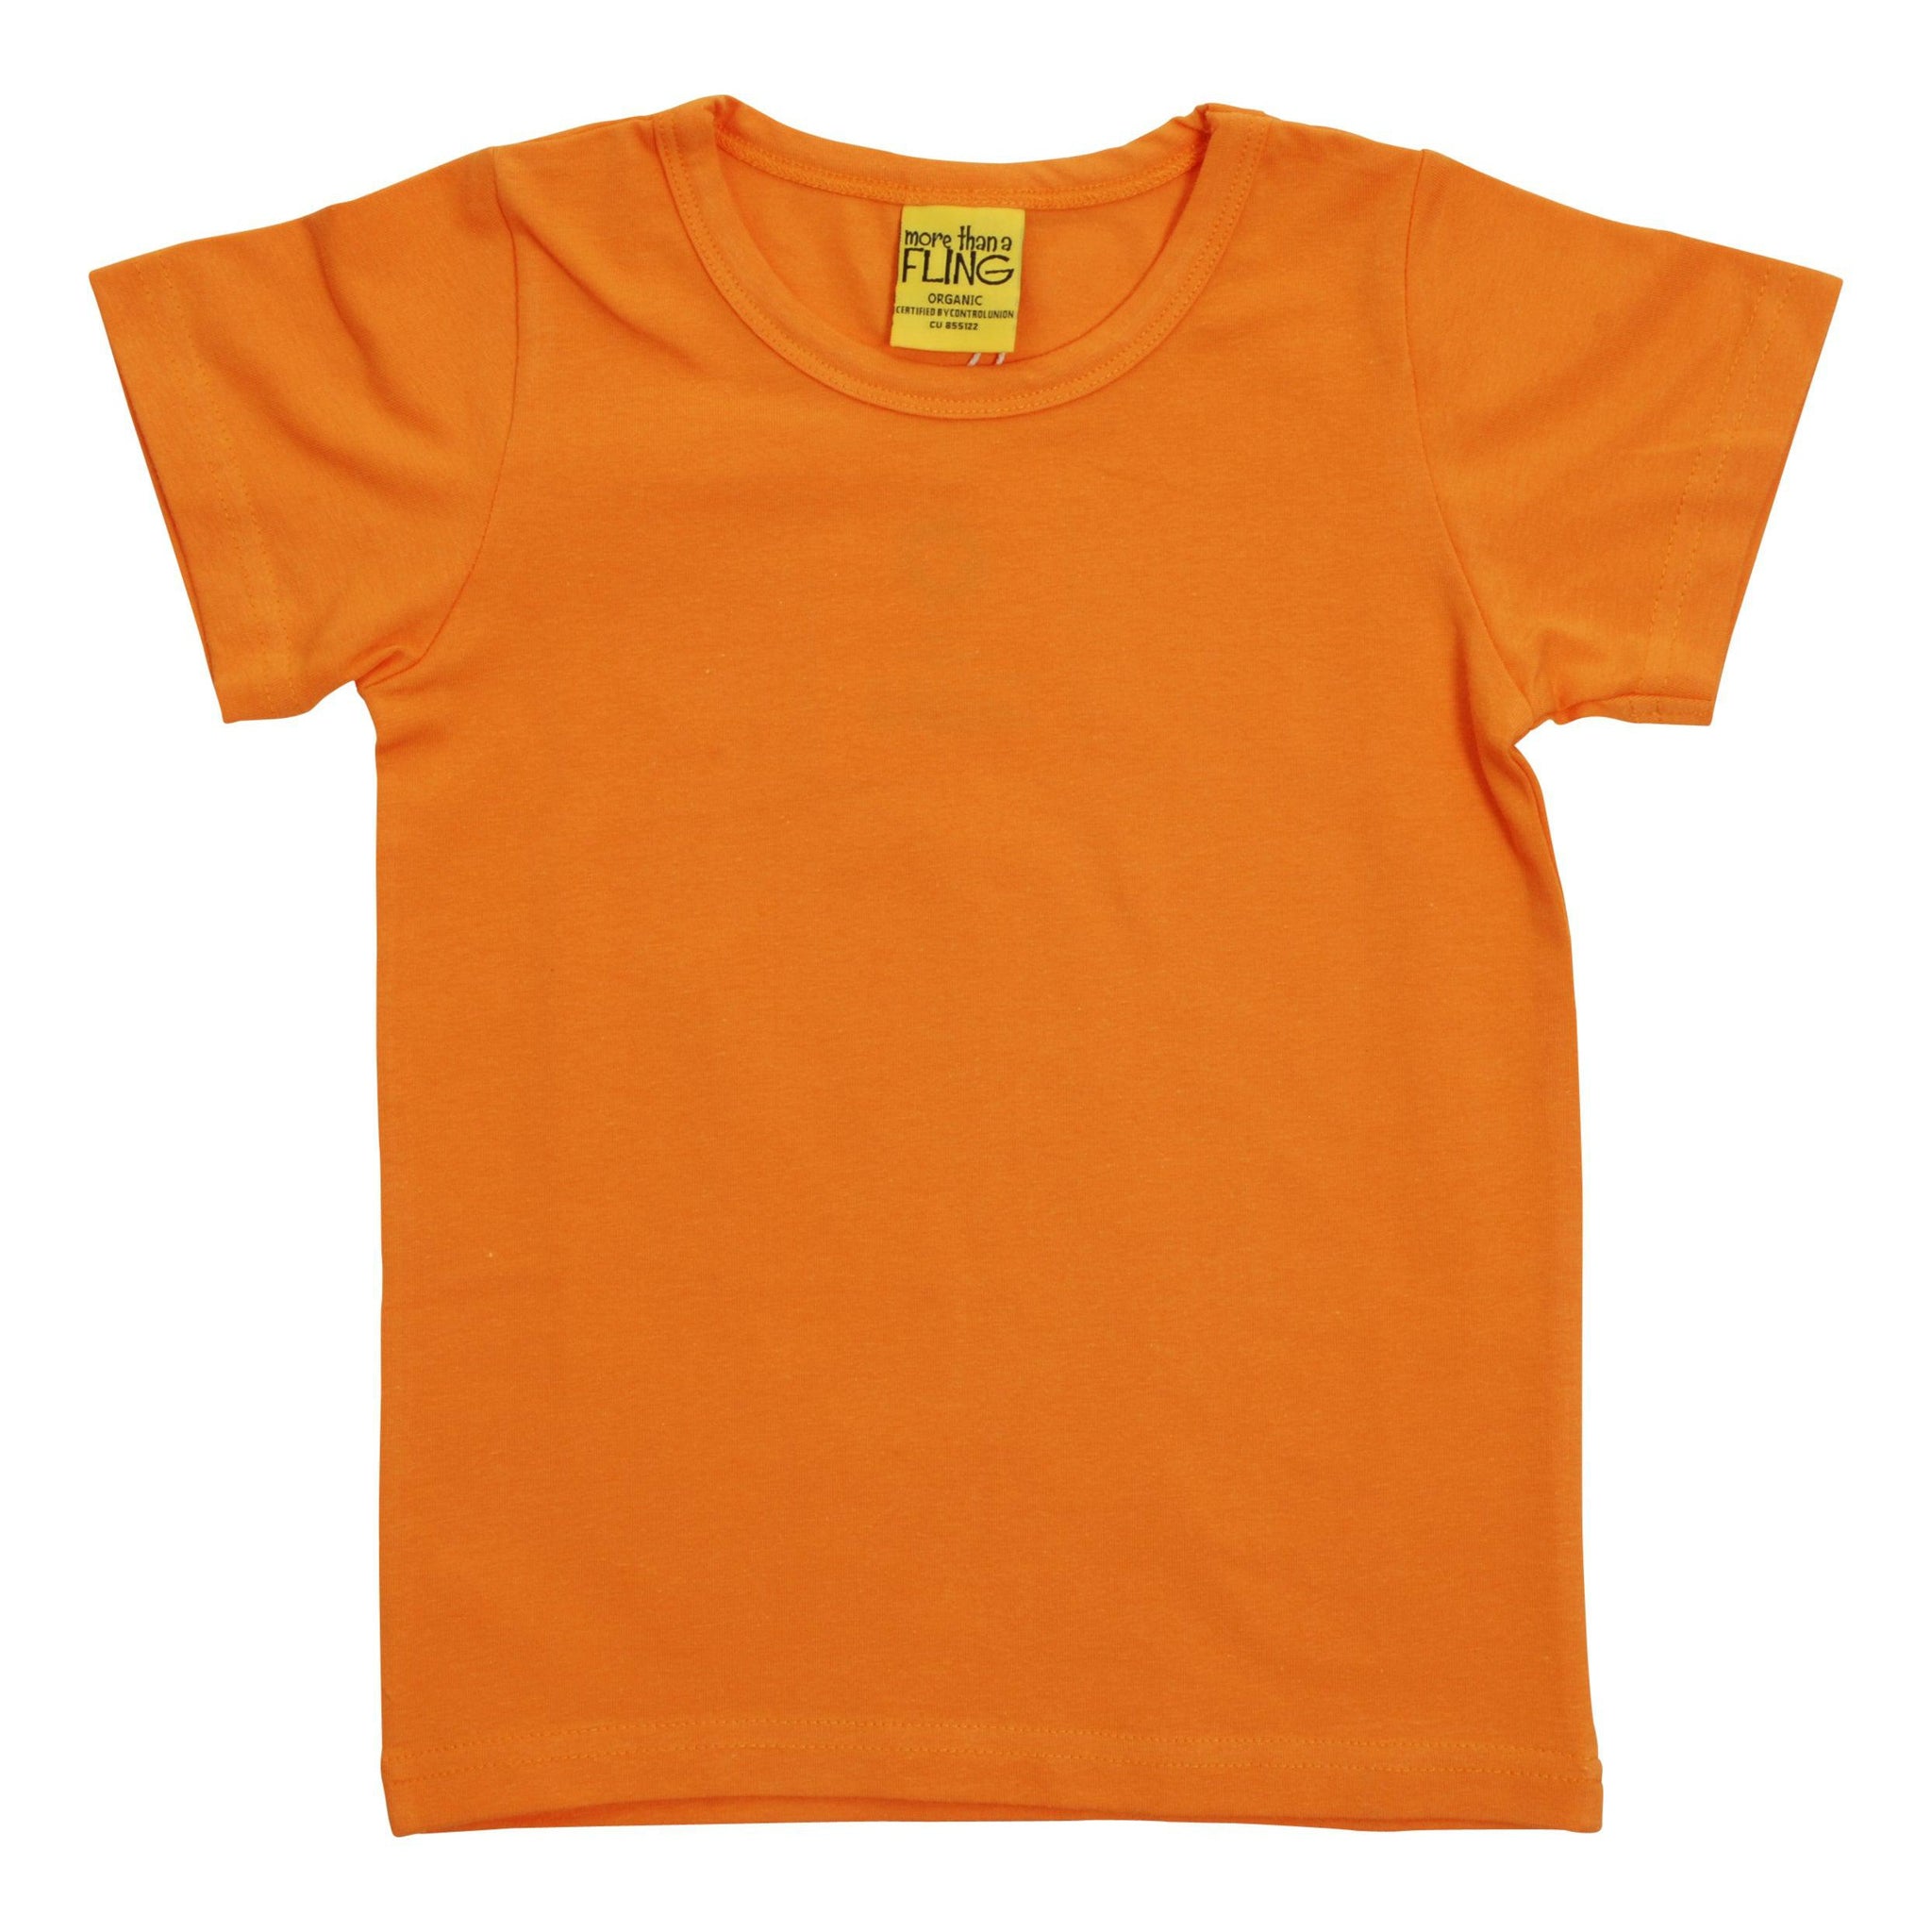 More Than A FLING - Apricot Short Sleeved Top